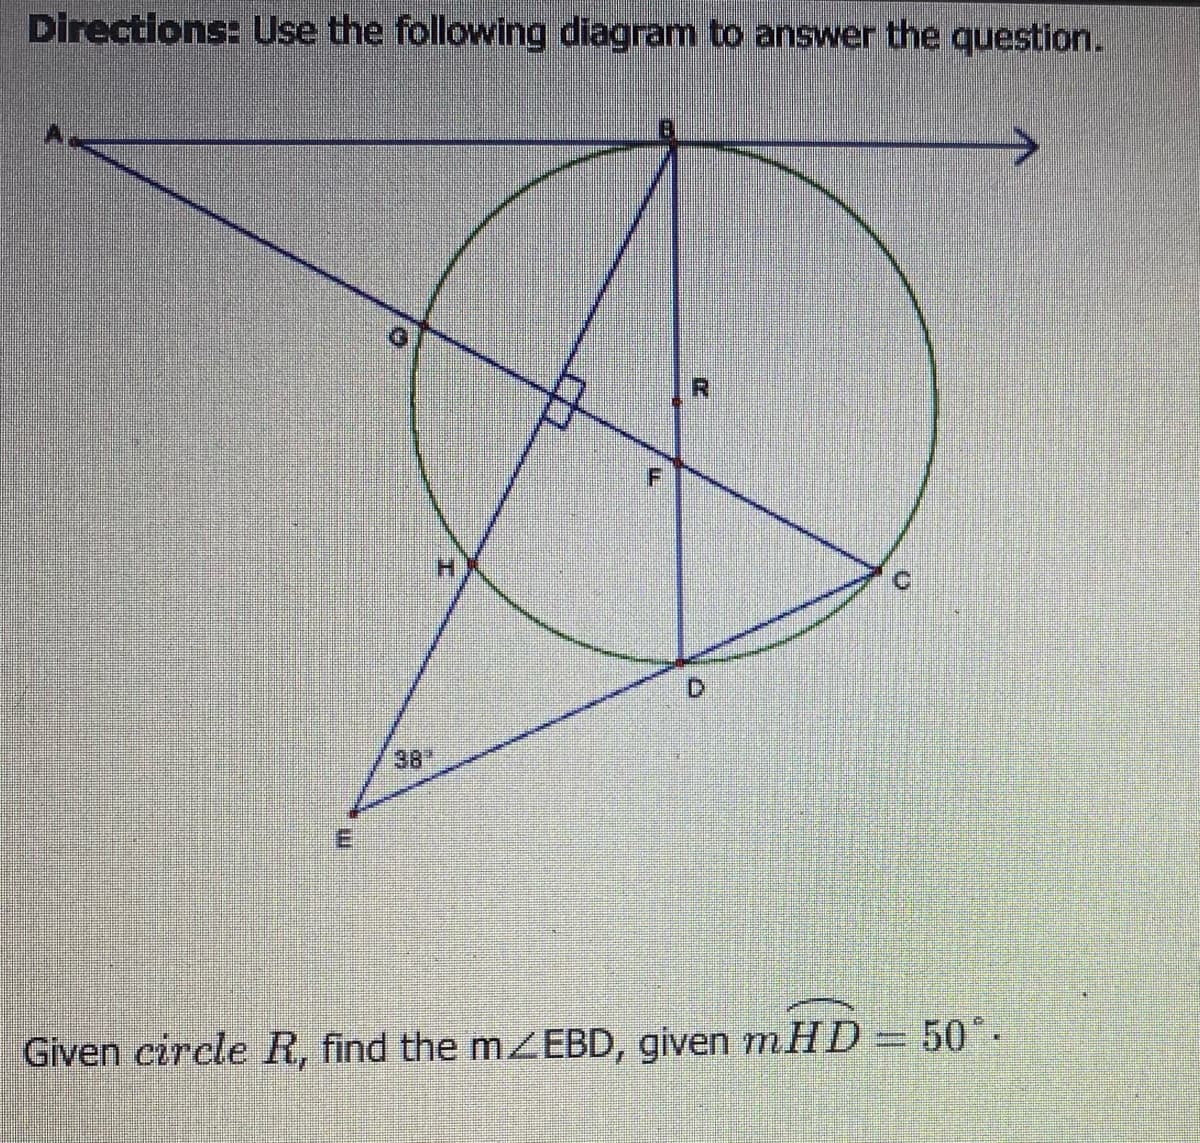 Directions: Use the following diagram to answer the question.
38
Given circle R, find the mEBD, given m.HD=50°.
